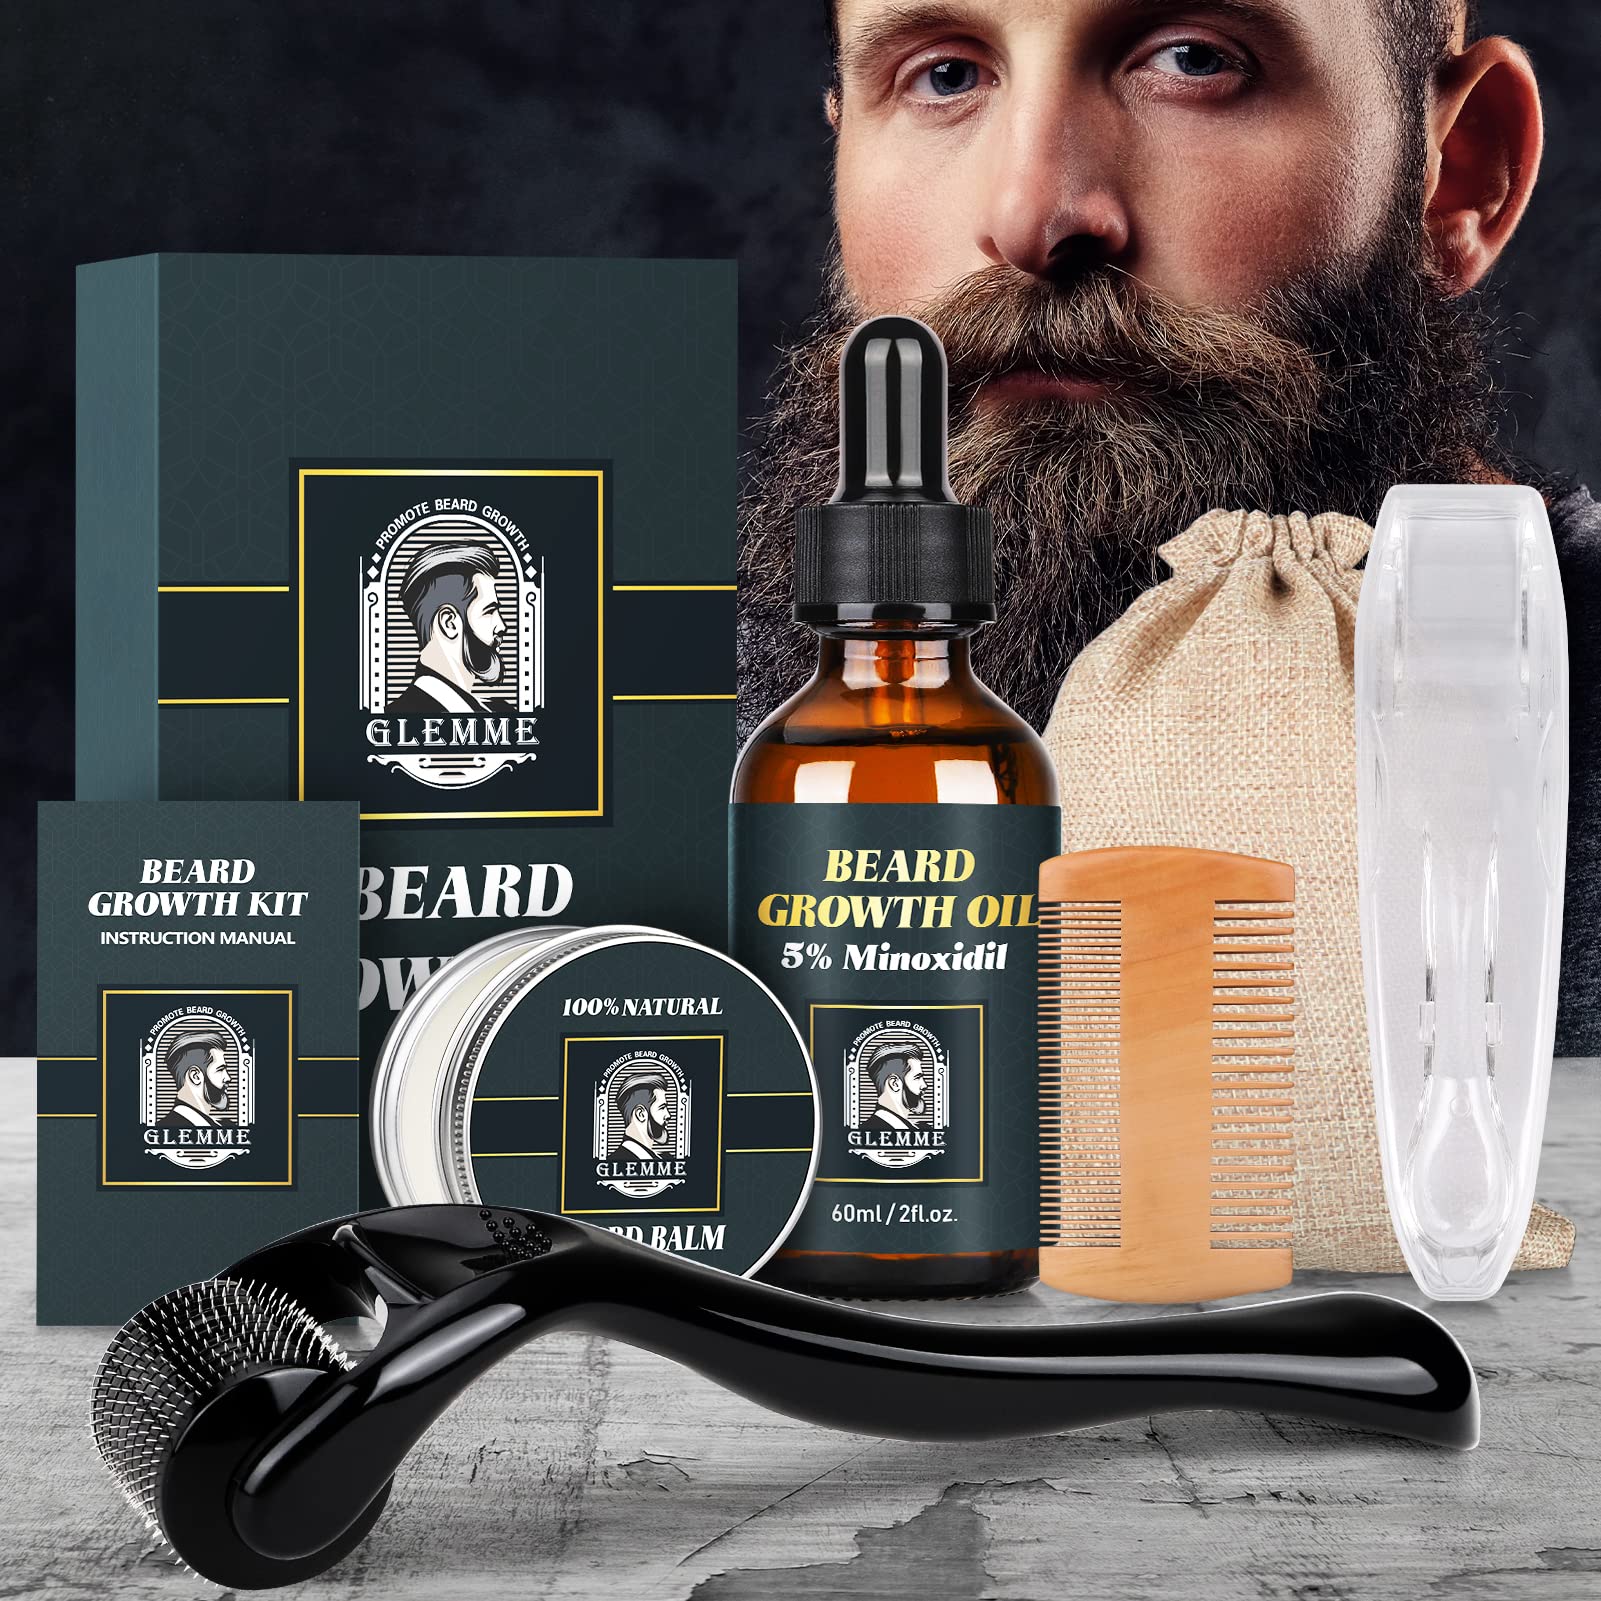 What is a Beard Kit For?